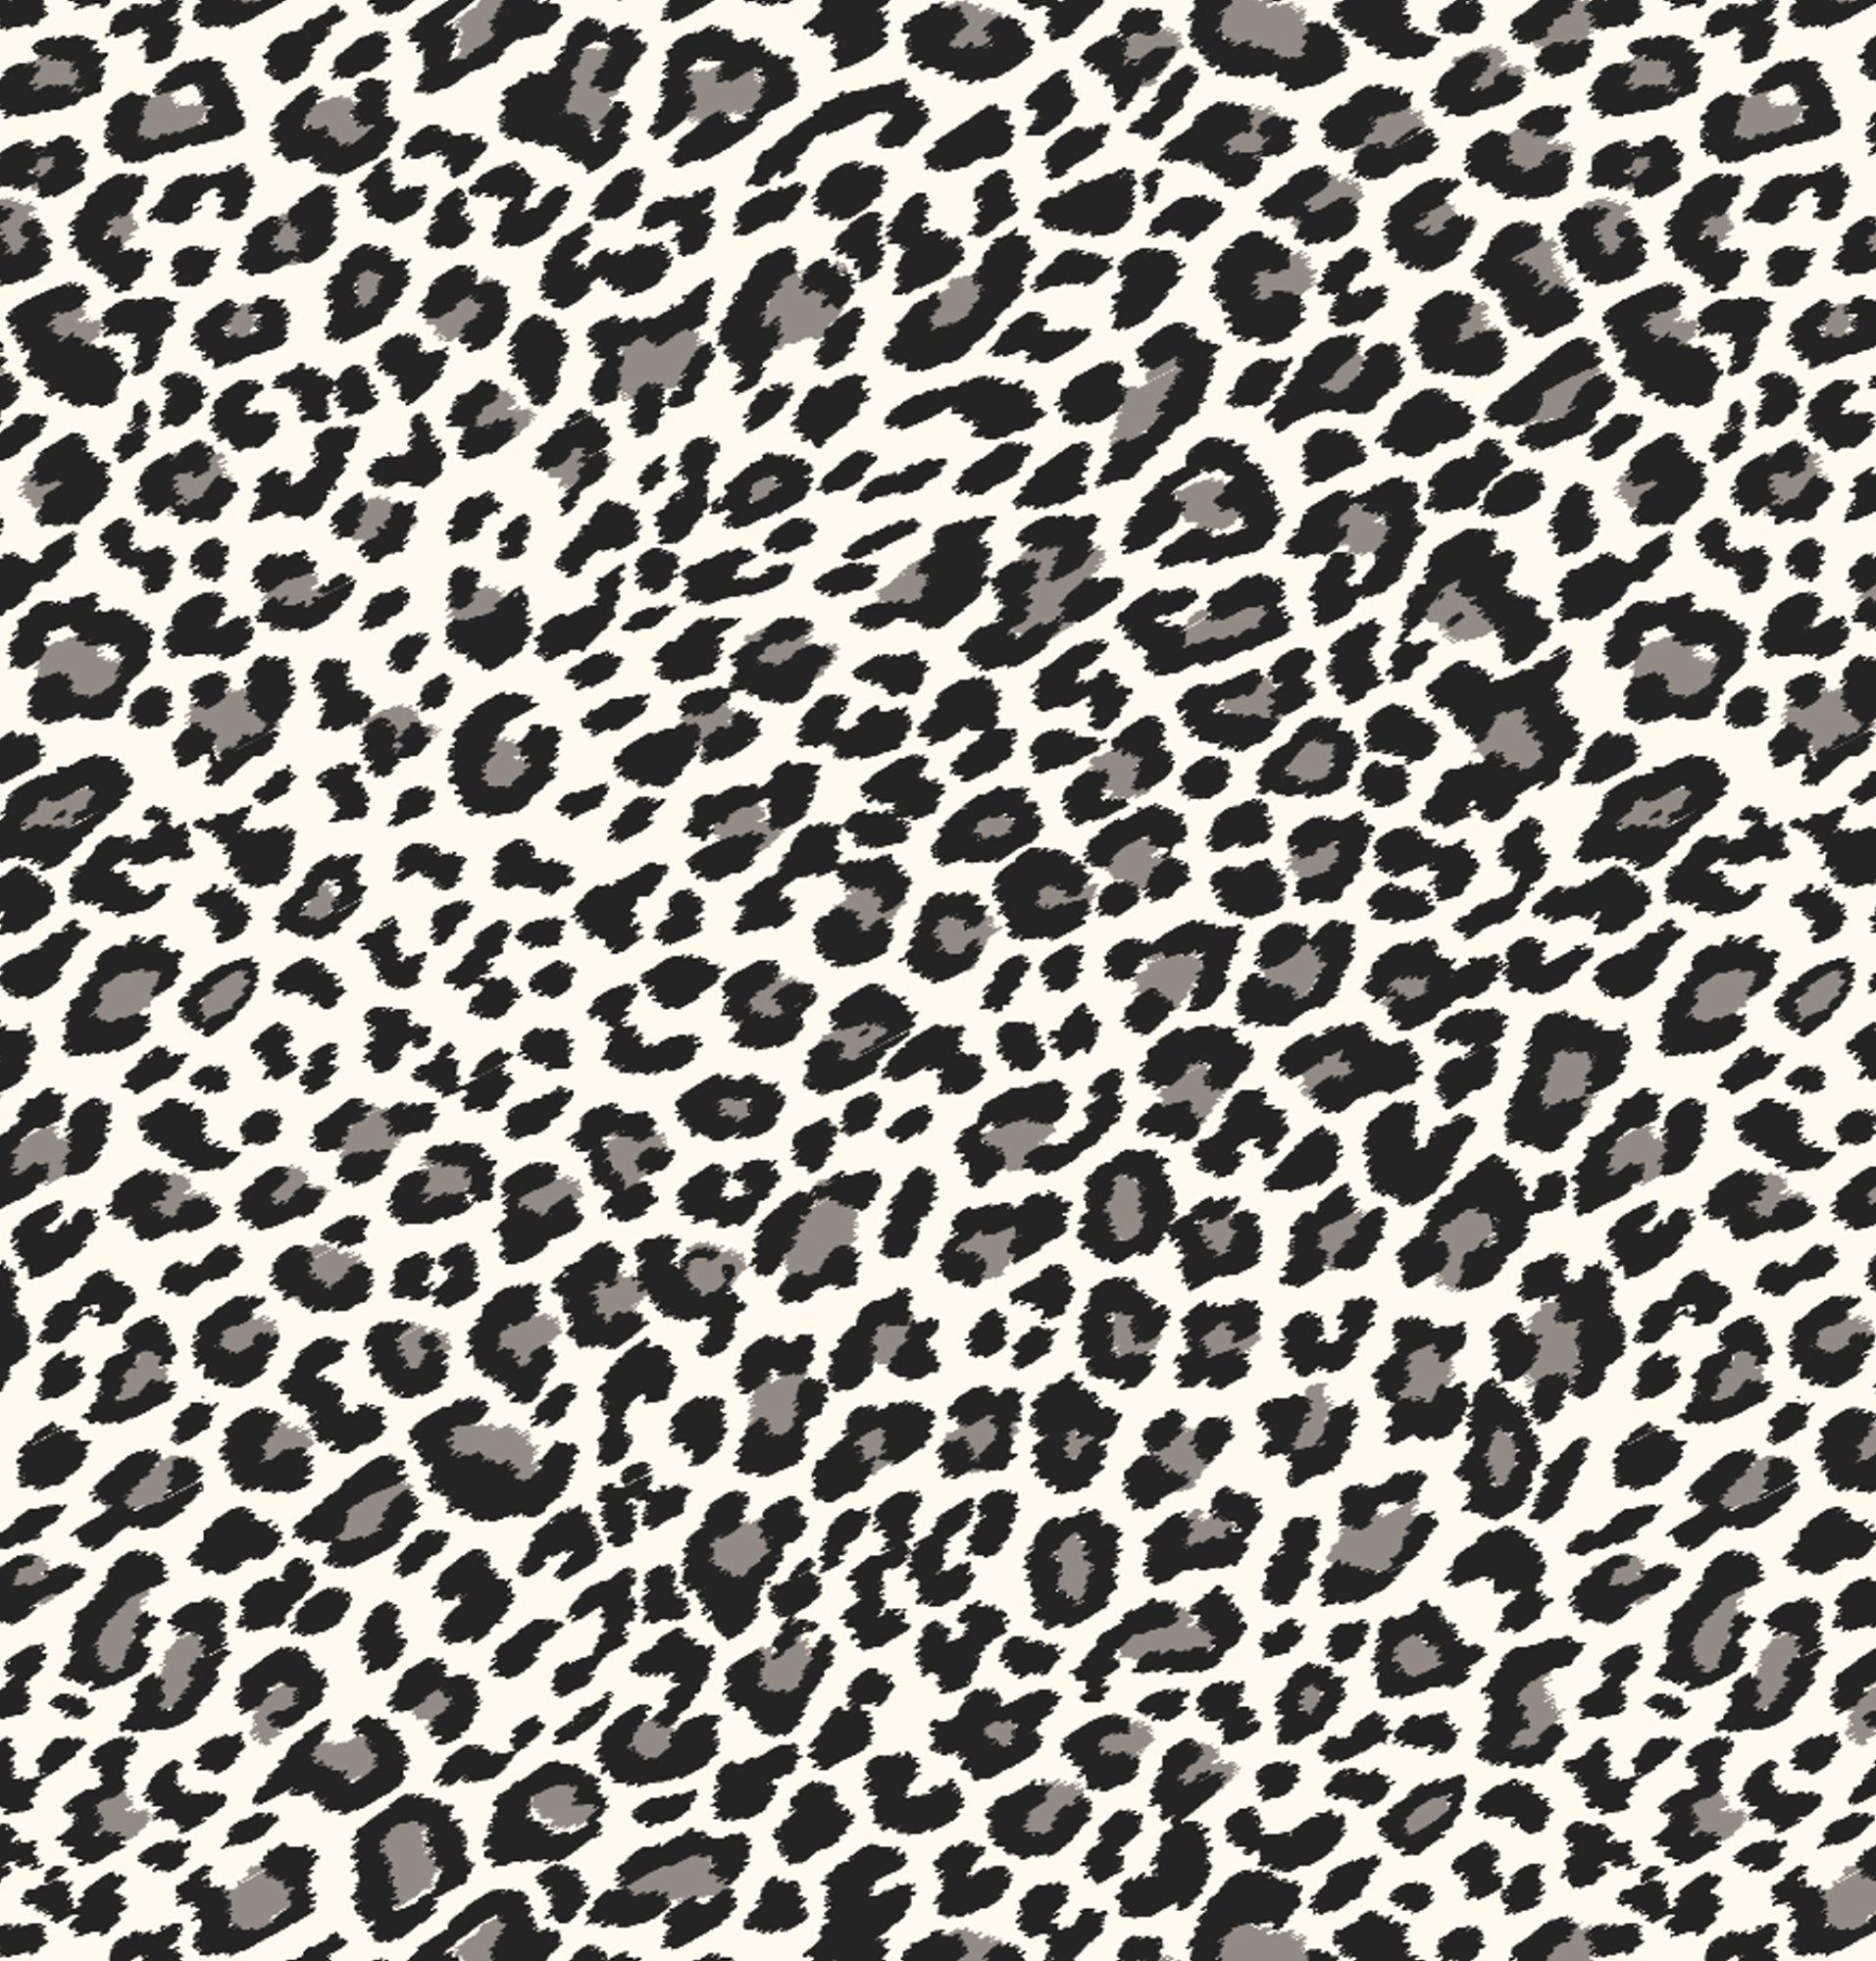 1913x2000 Black and White Animal Print Wallpapers Top Free Black and White Animal Print Backgrounds